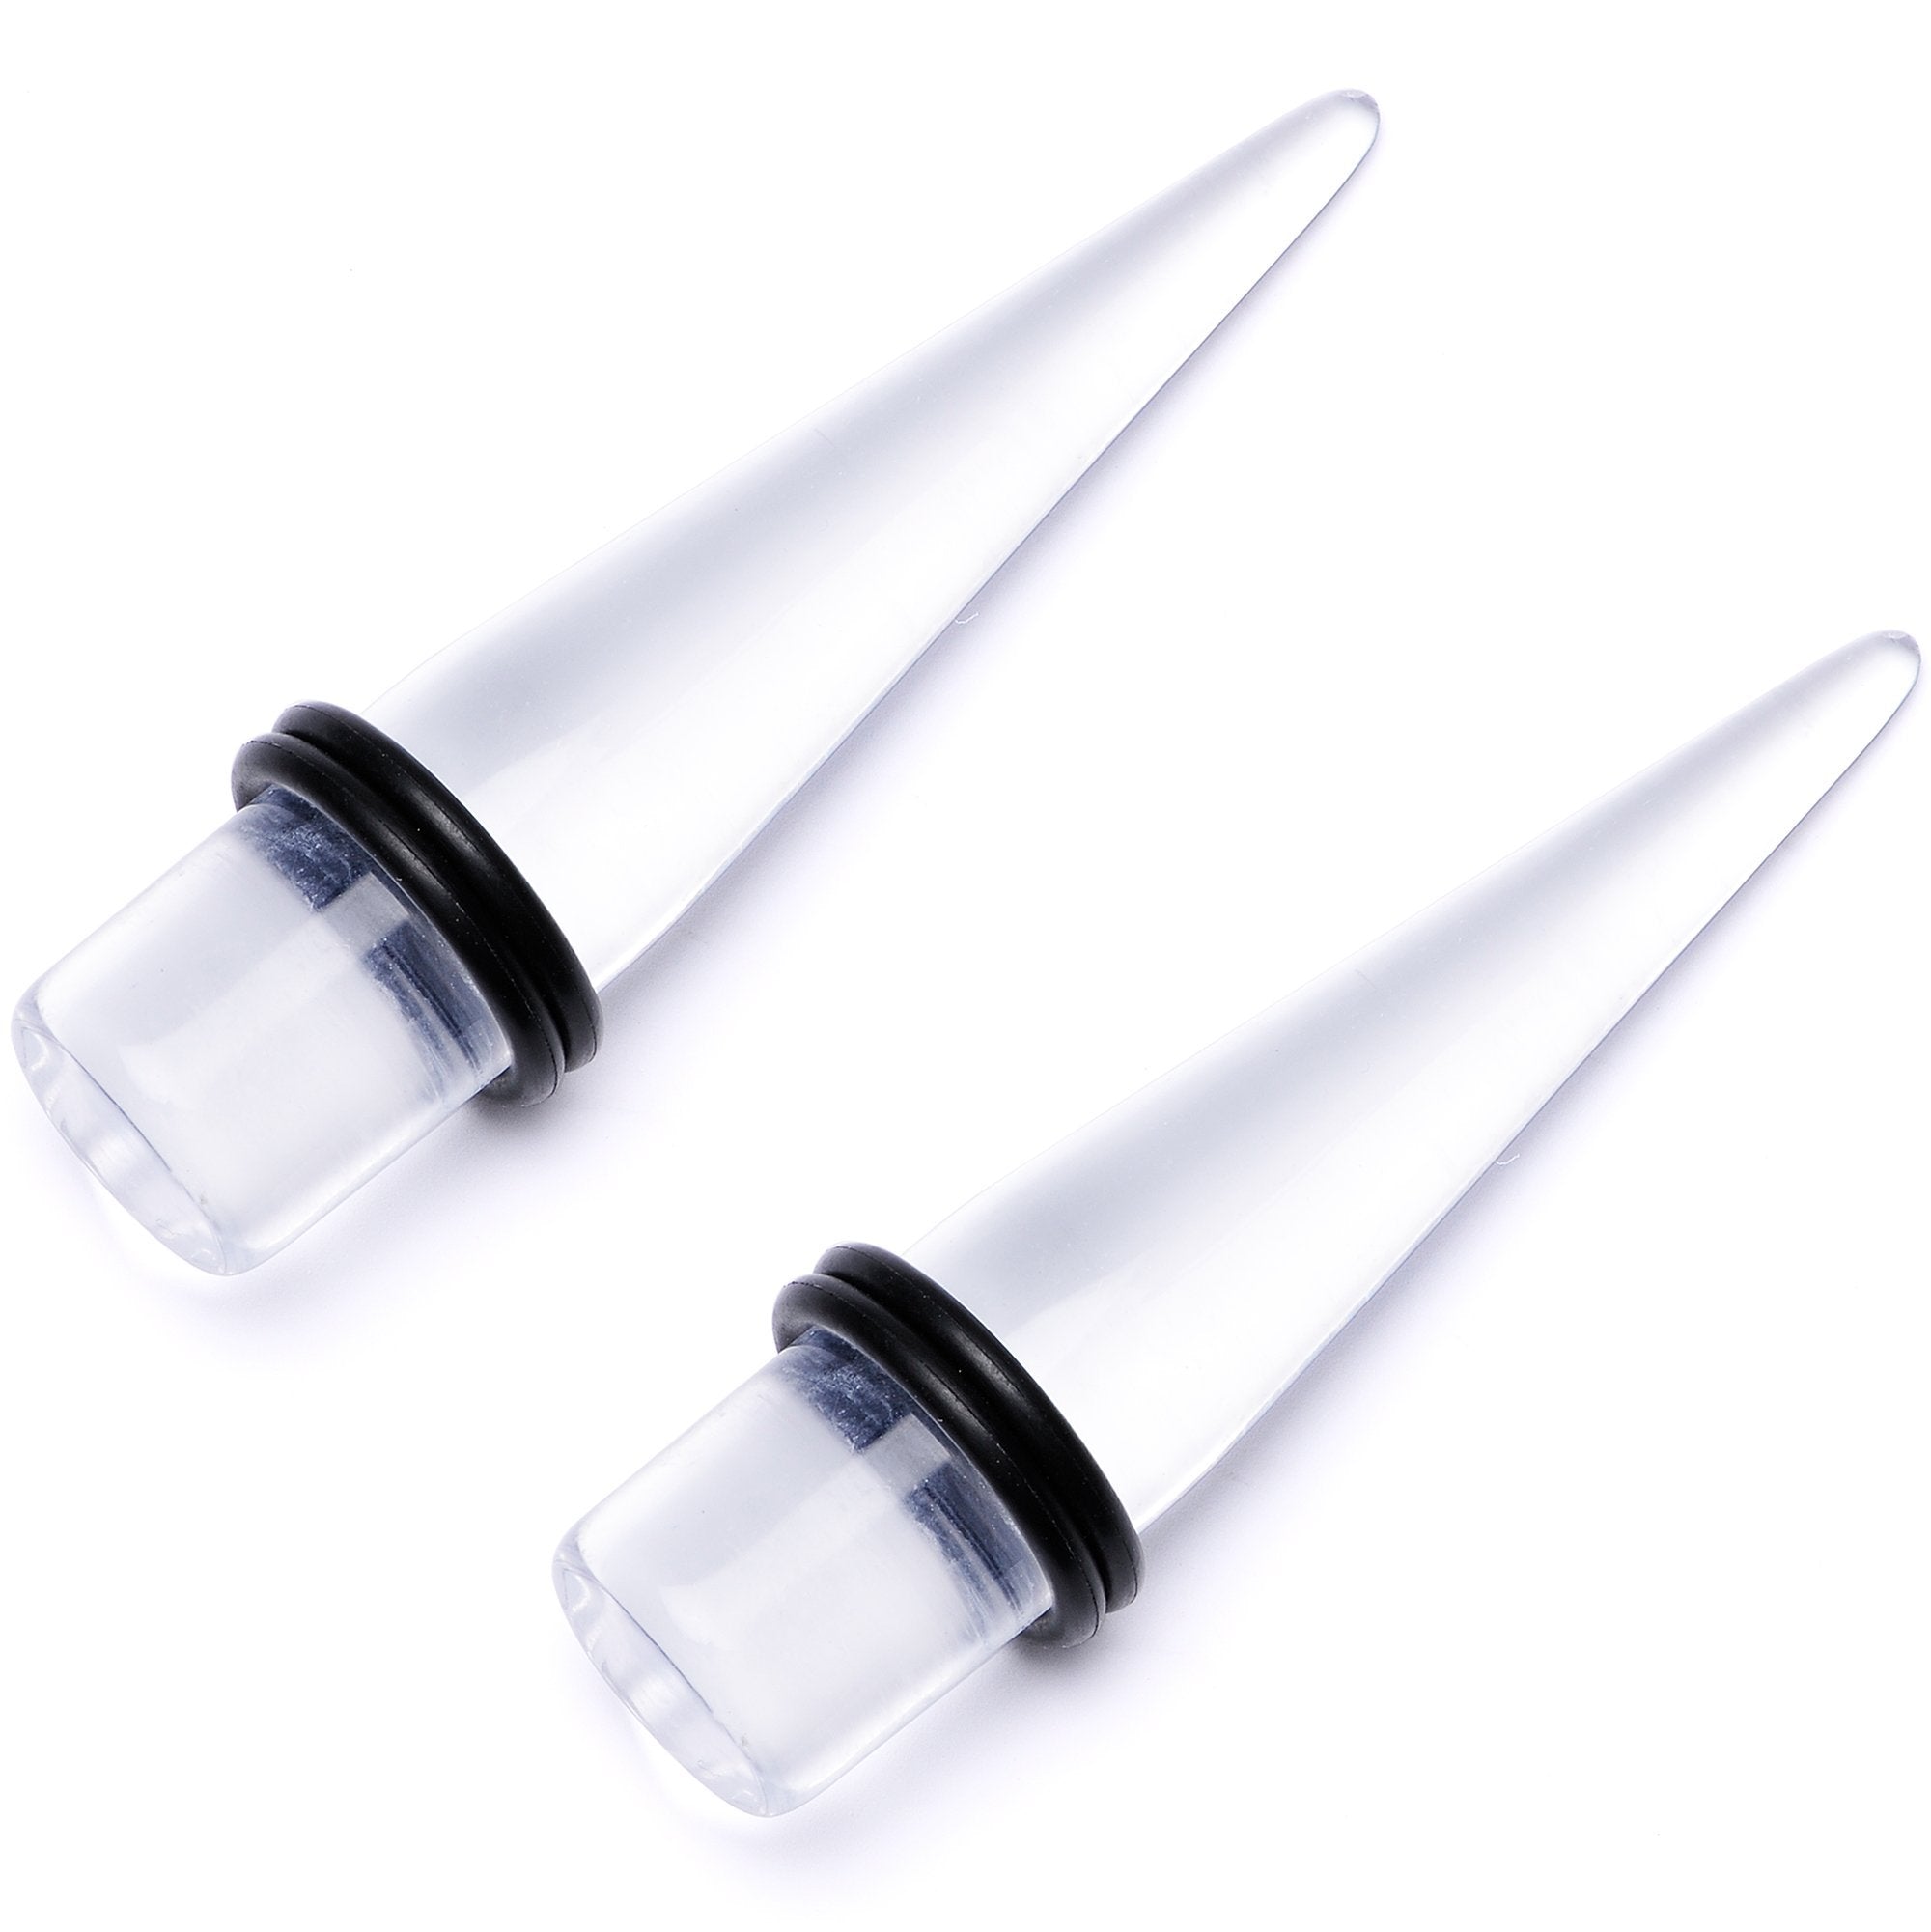 Freaky Fun Lightweight Clear Acrylic Straight Taper Set 2mm to 1 Inch